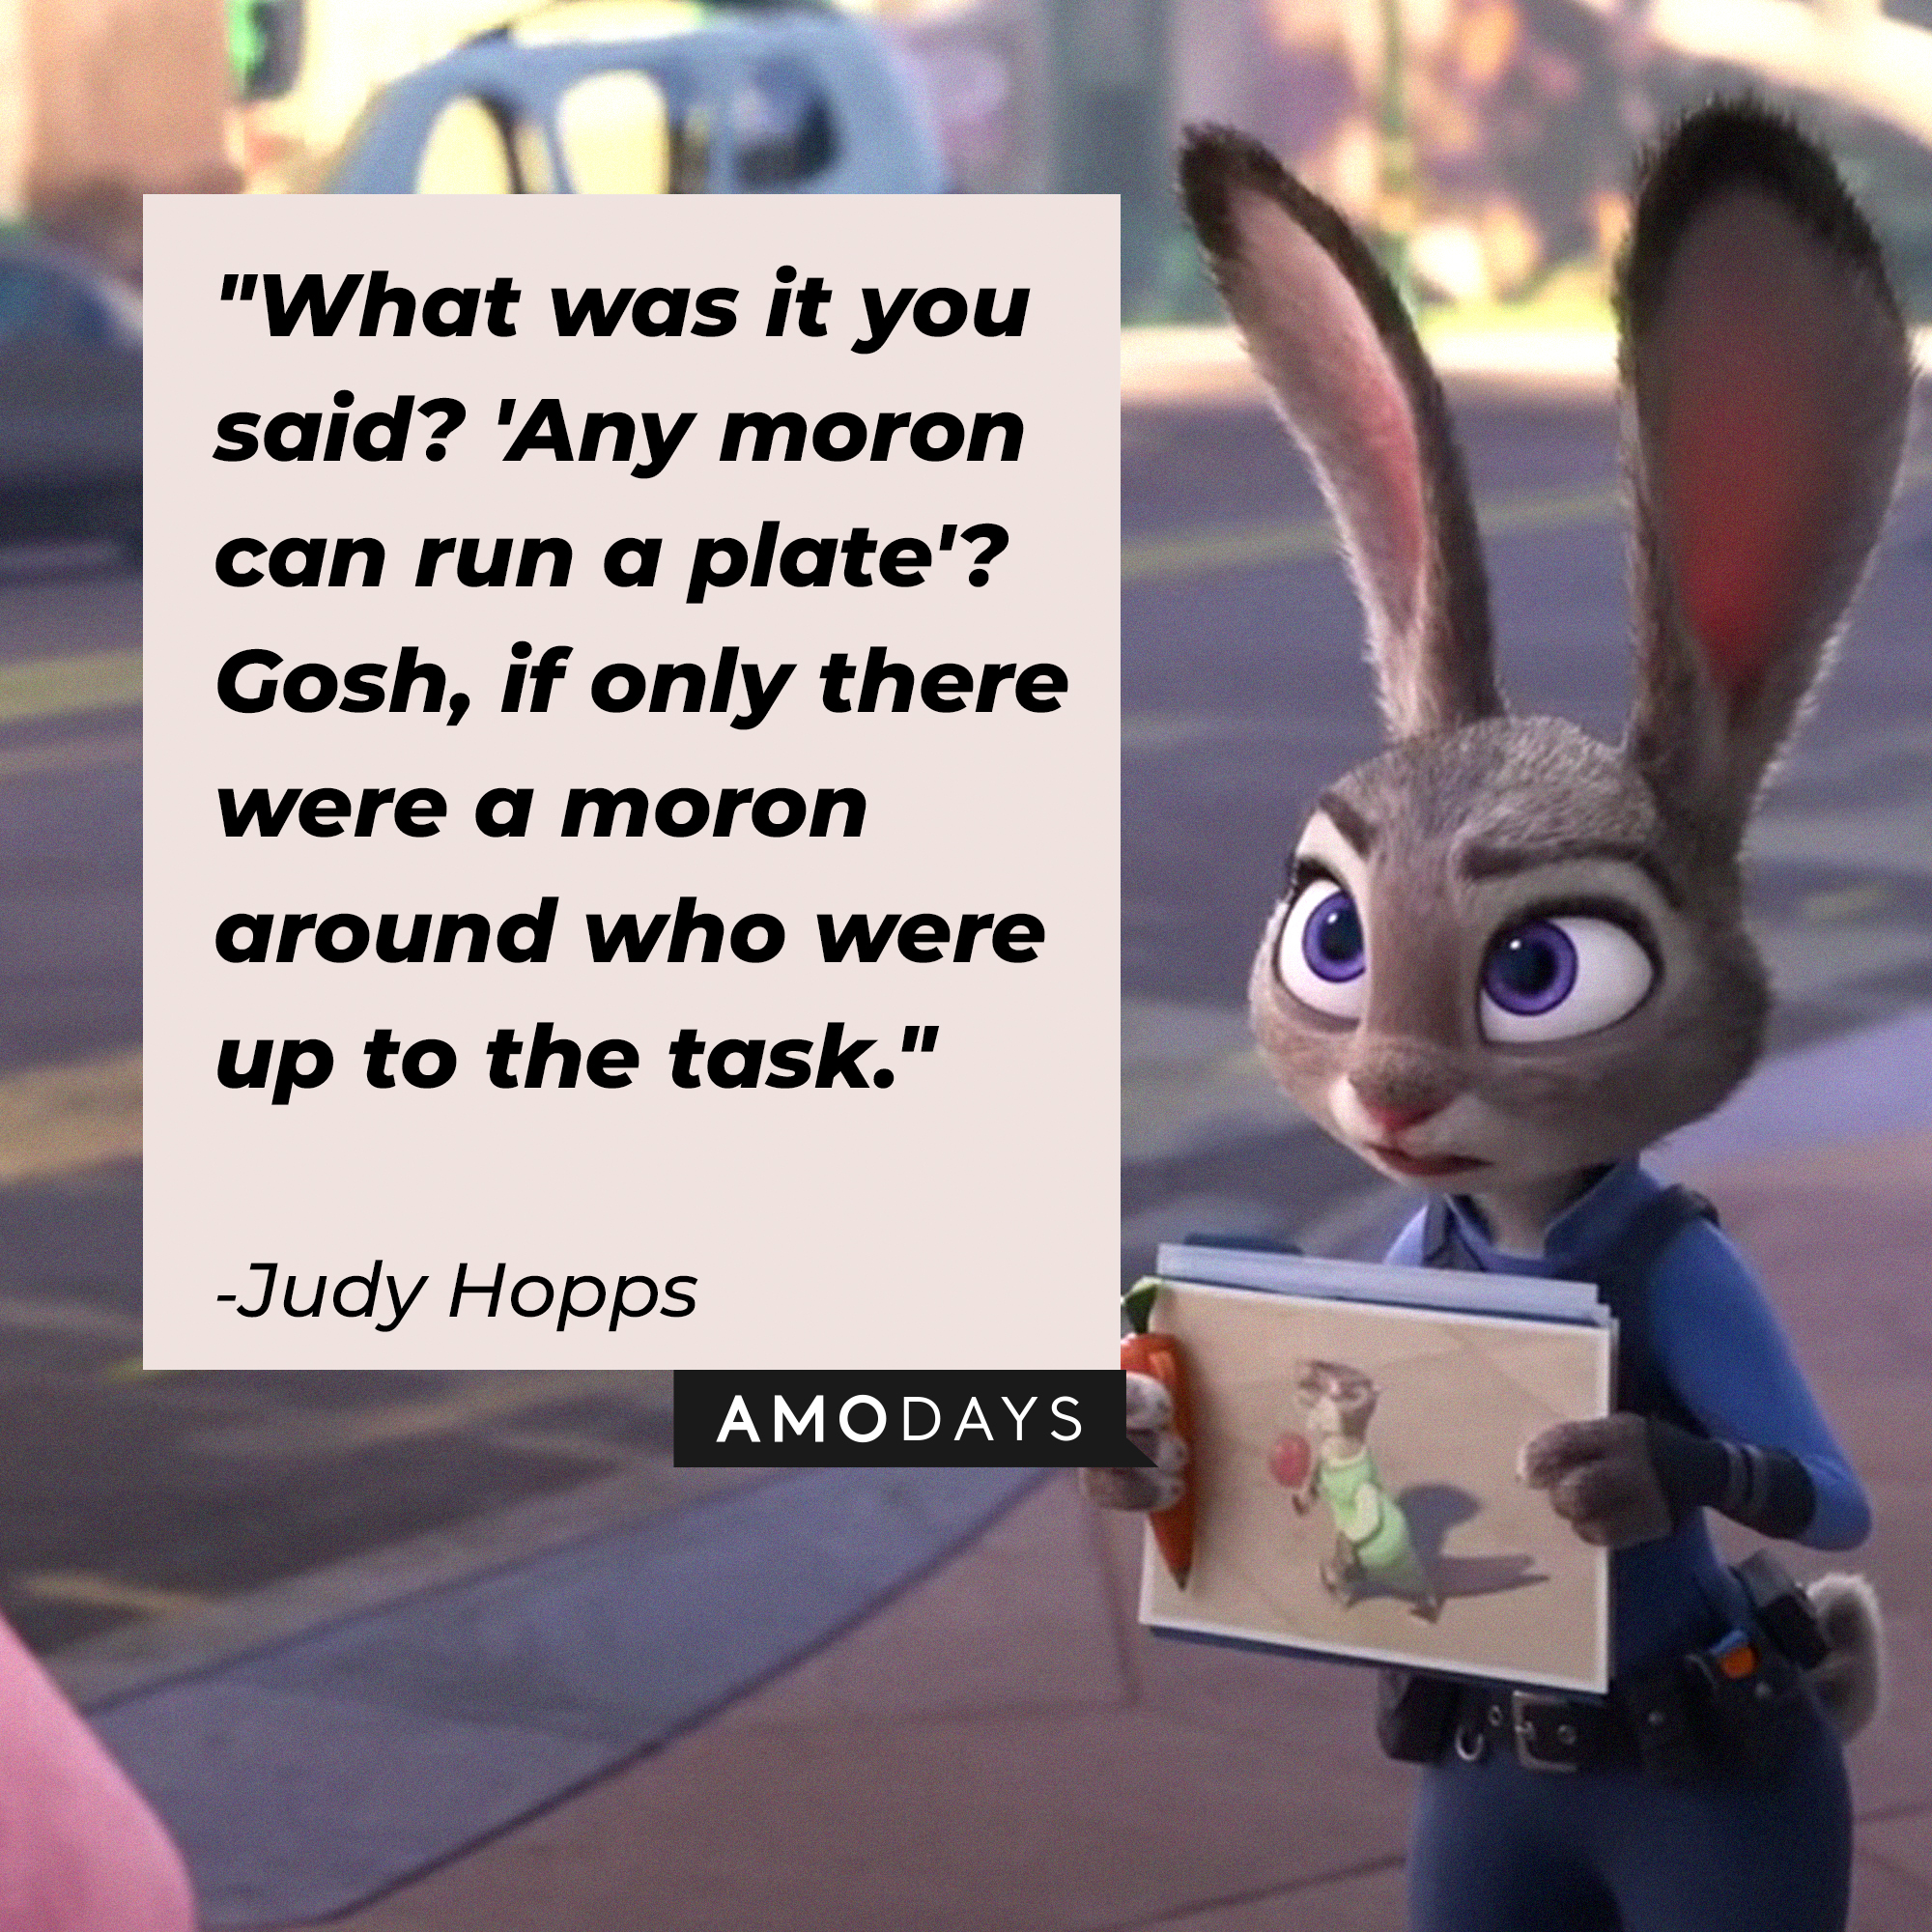 Jody Hopps' quote: "What was it you said? 'Any moron can run a plate'? Gosh, if only there were a moron around who were up to the task." | Source: facebook.com/DisneyZootopia